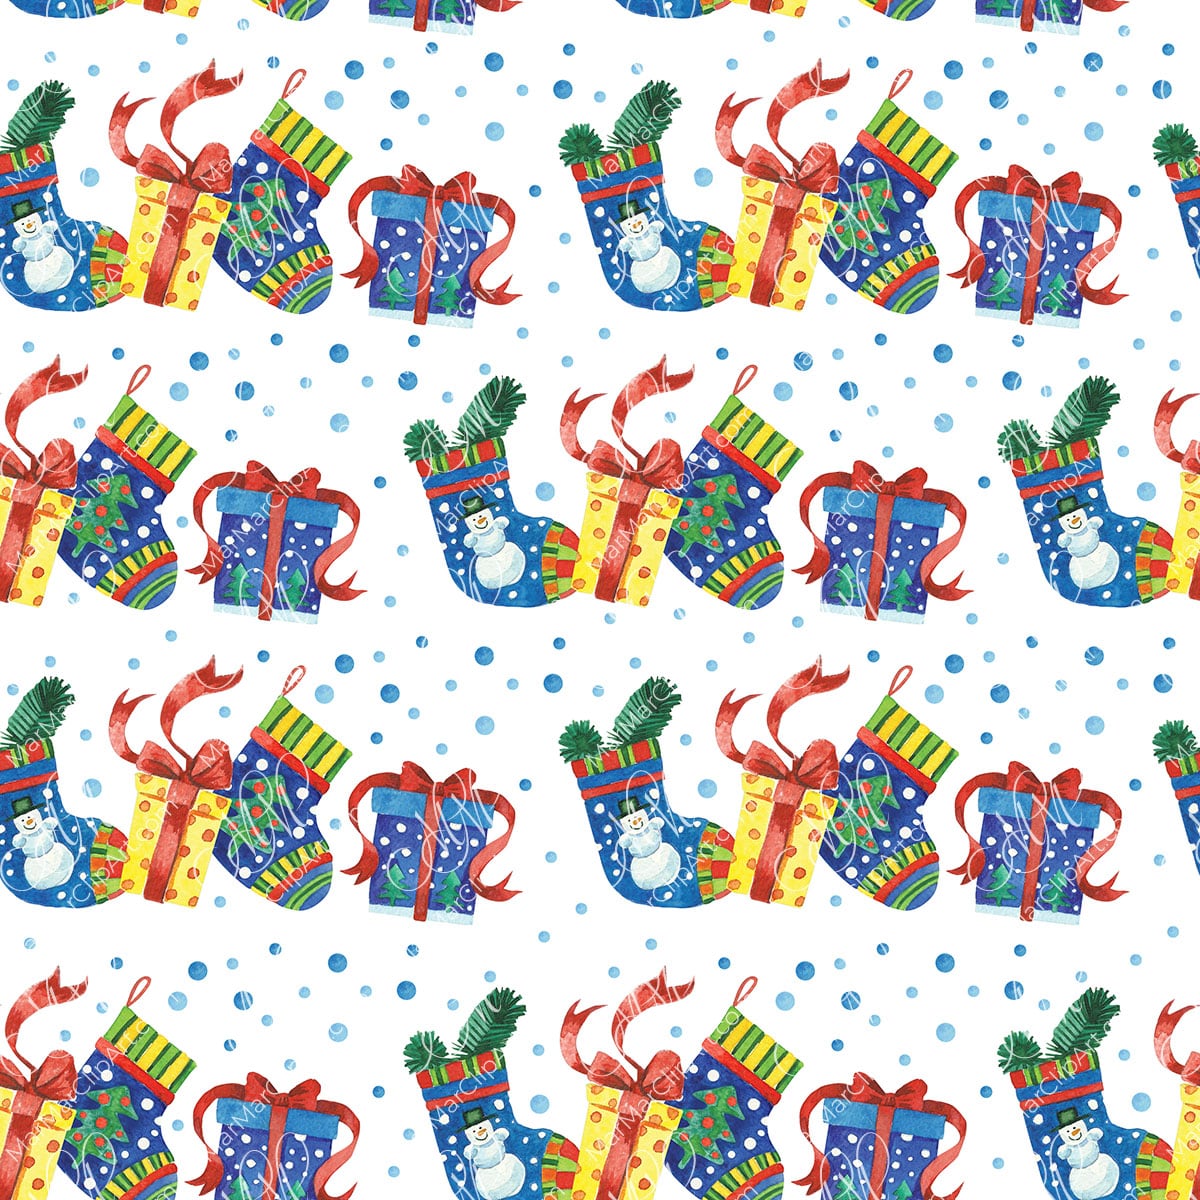 Christmas seamless pattern: gifts and socks. Watercolor hand made illustration, can be used for gift paper, your designs, cards, invitations